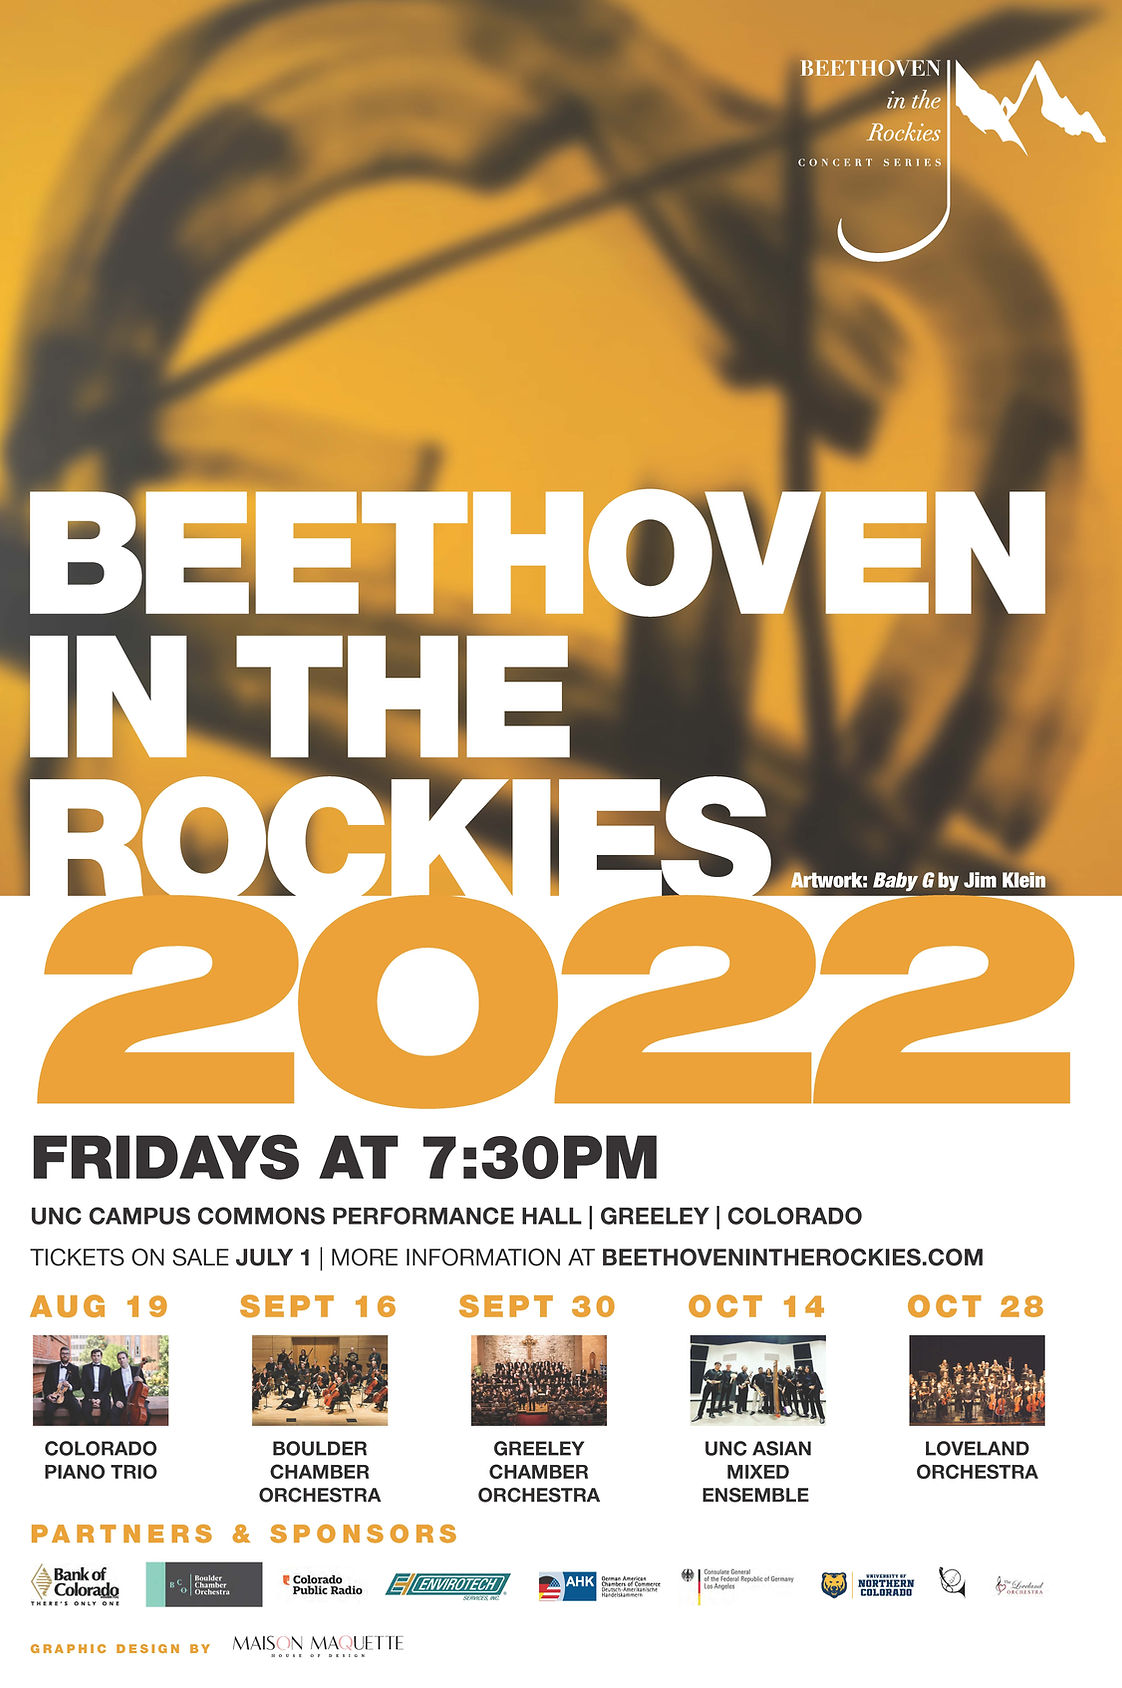 Beethoven in the Rockies: Concert Series (BITR) Official 2022 Poster